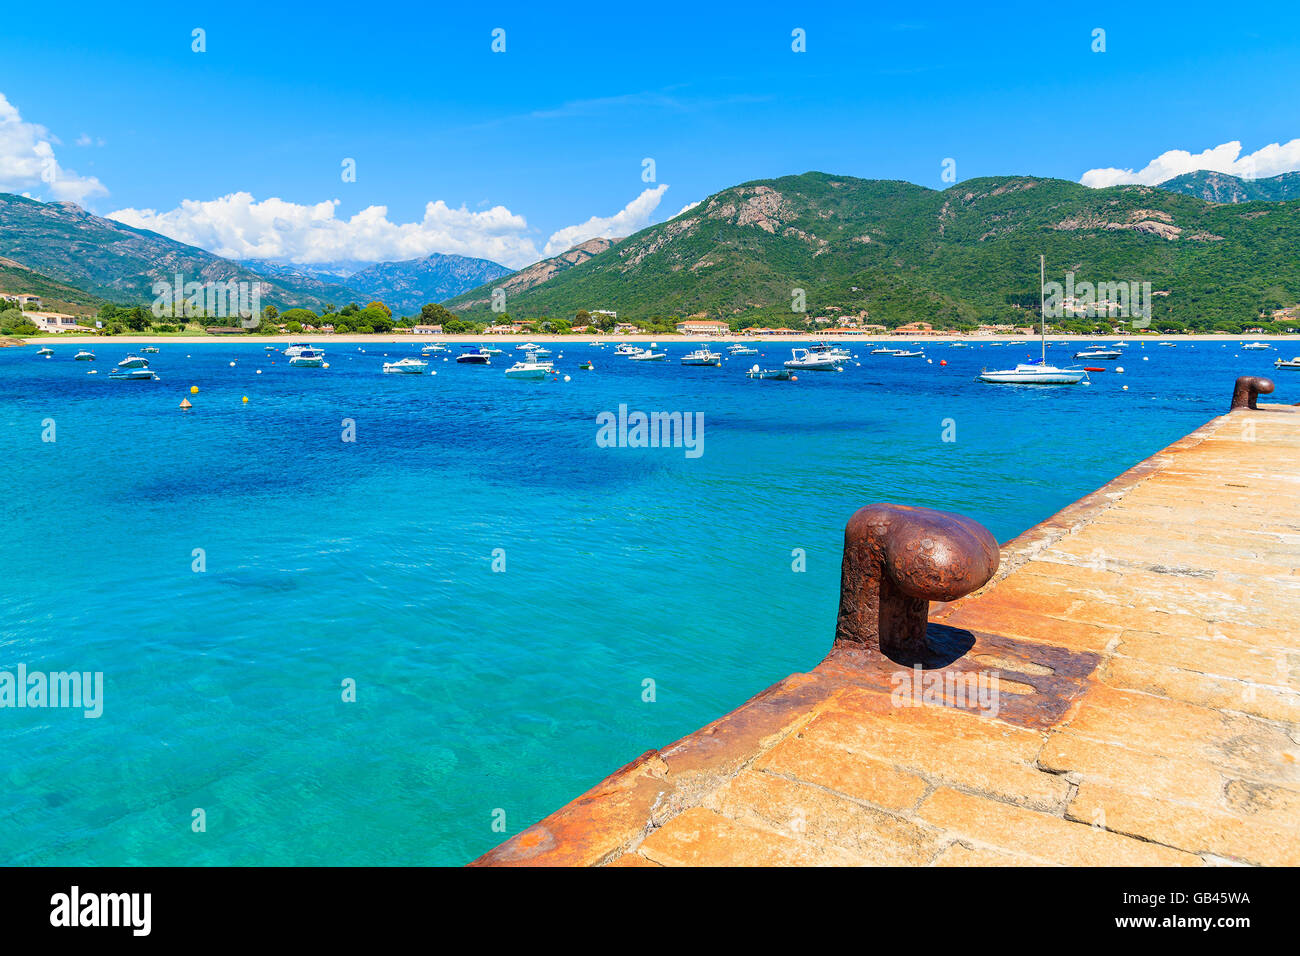 Turquoise sea and mountains on coast of southern Corsica island near Cargese town, France Stock Photo